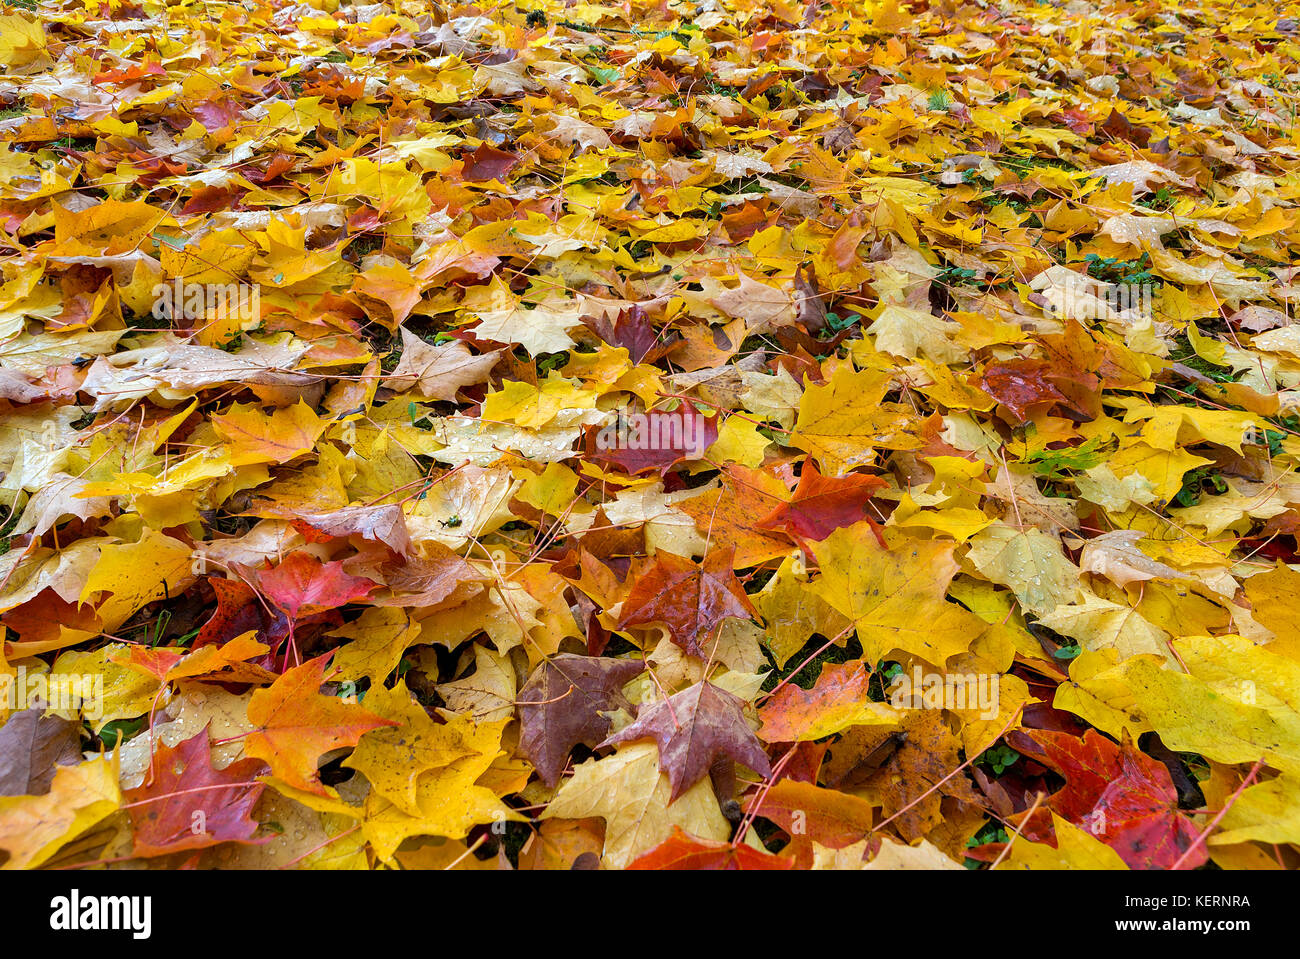 Fallen leaves covering parks garden ground in Fall season foliage color Stock Photo